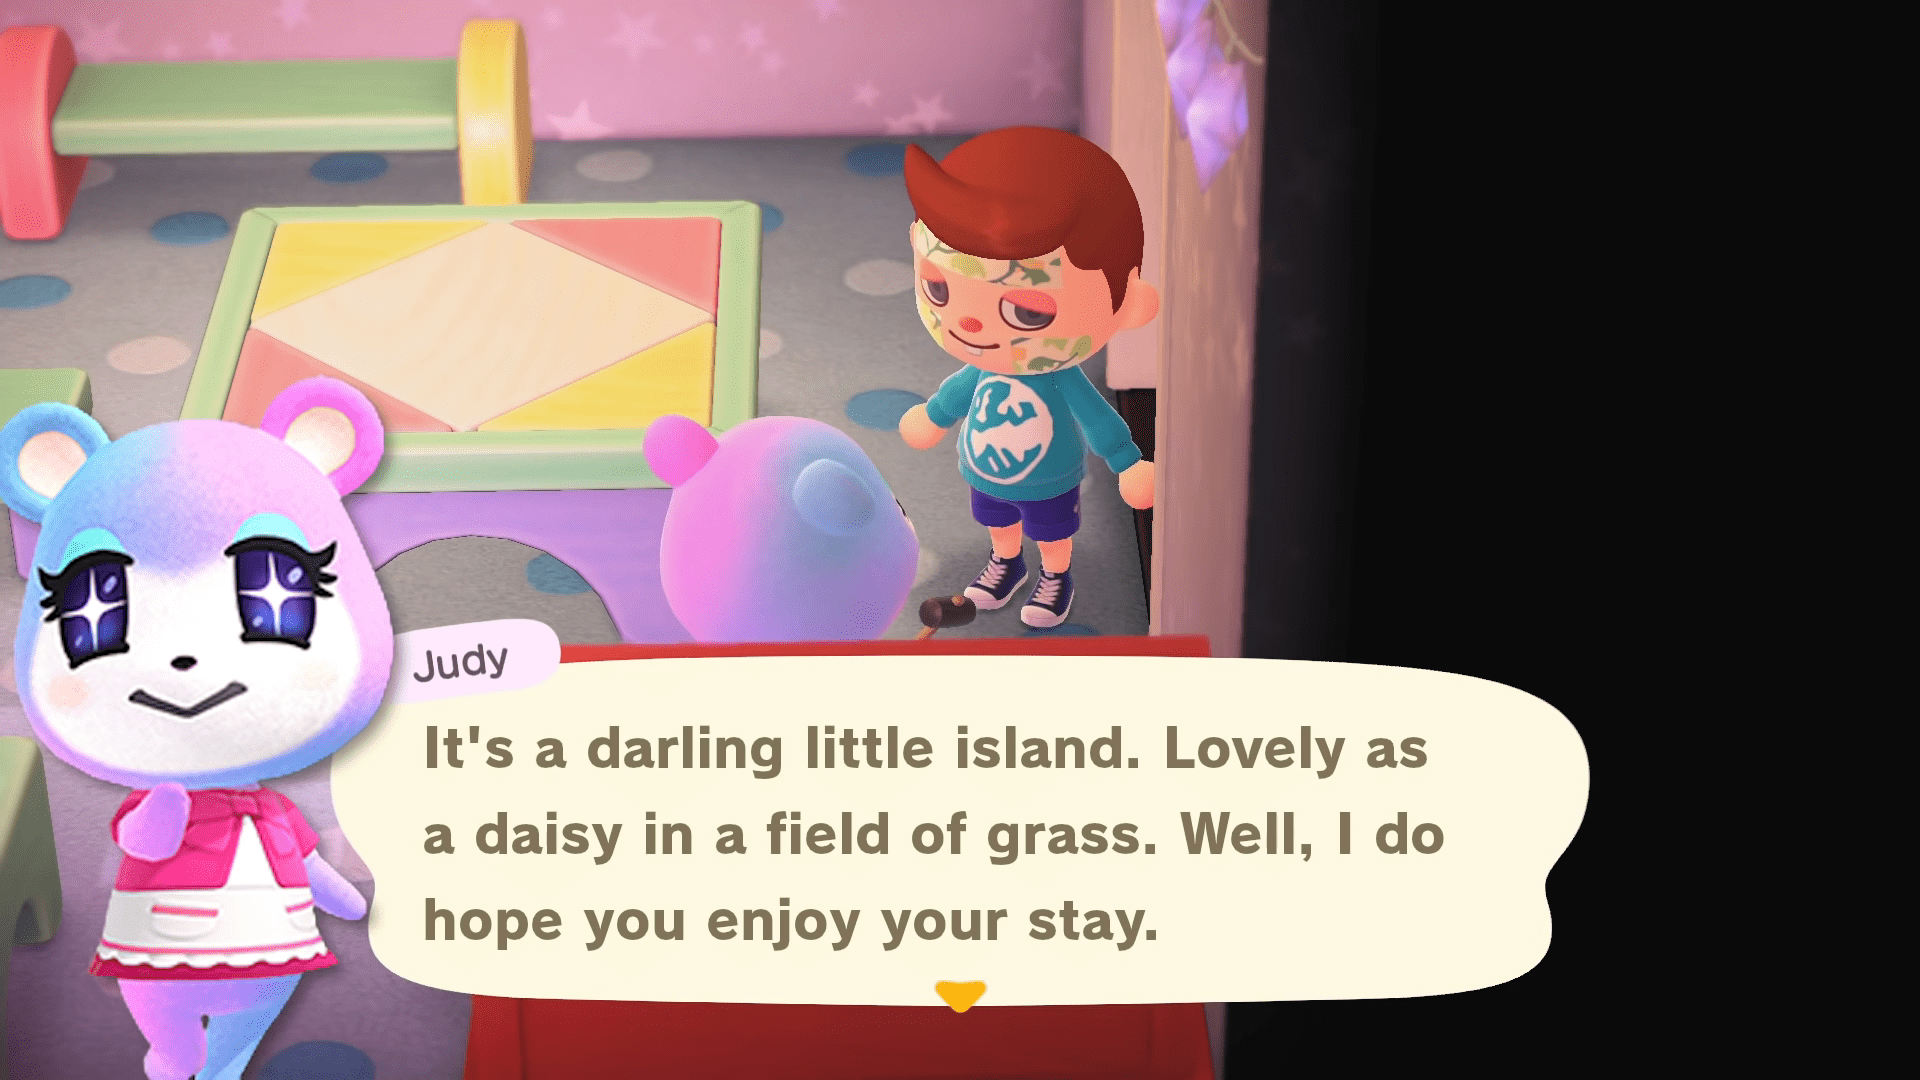 Animal Crossing New Horizons: Guide To Villager Personalities And How To Form A Cohesive Island